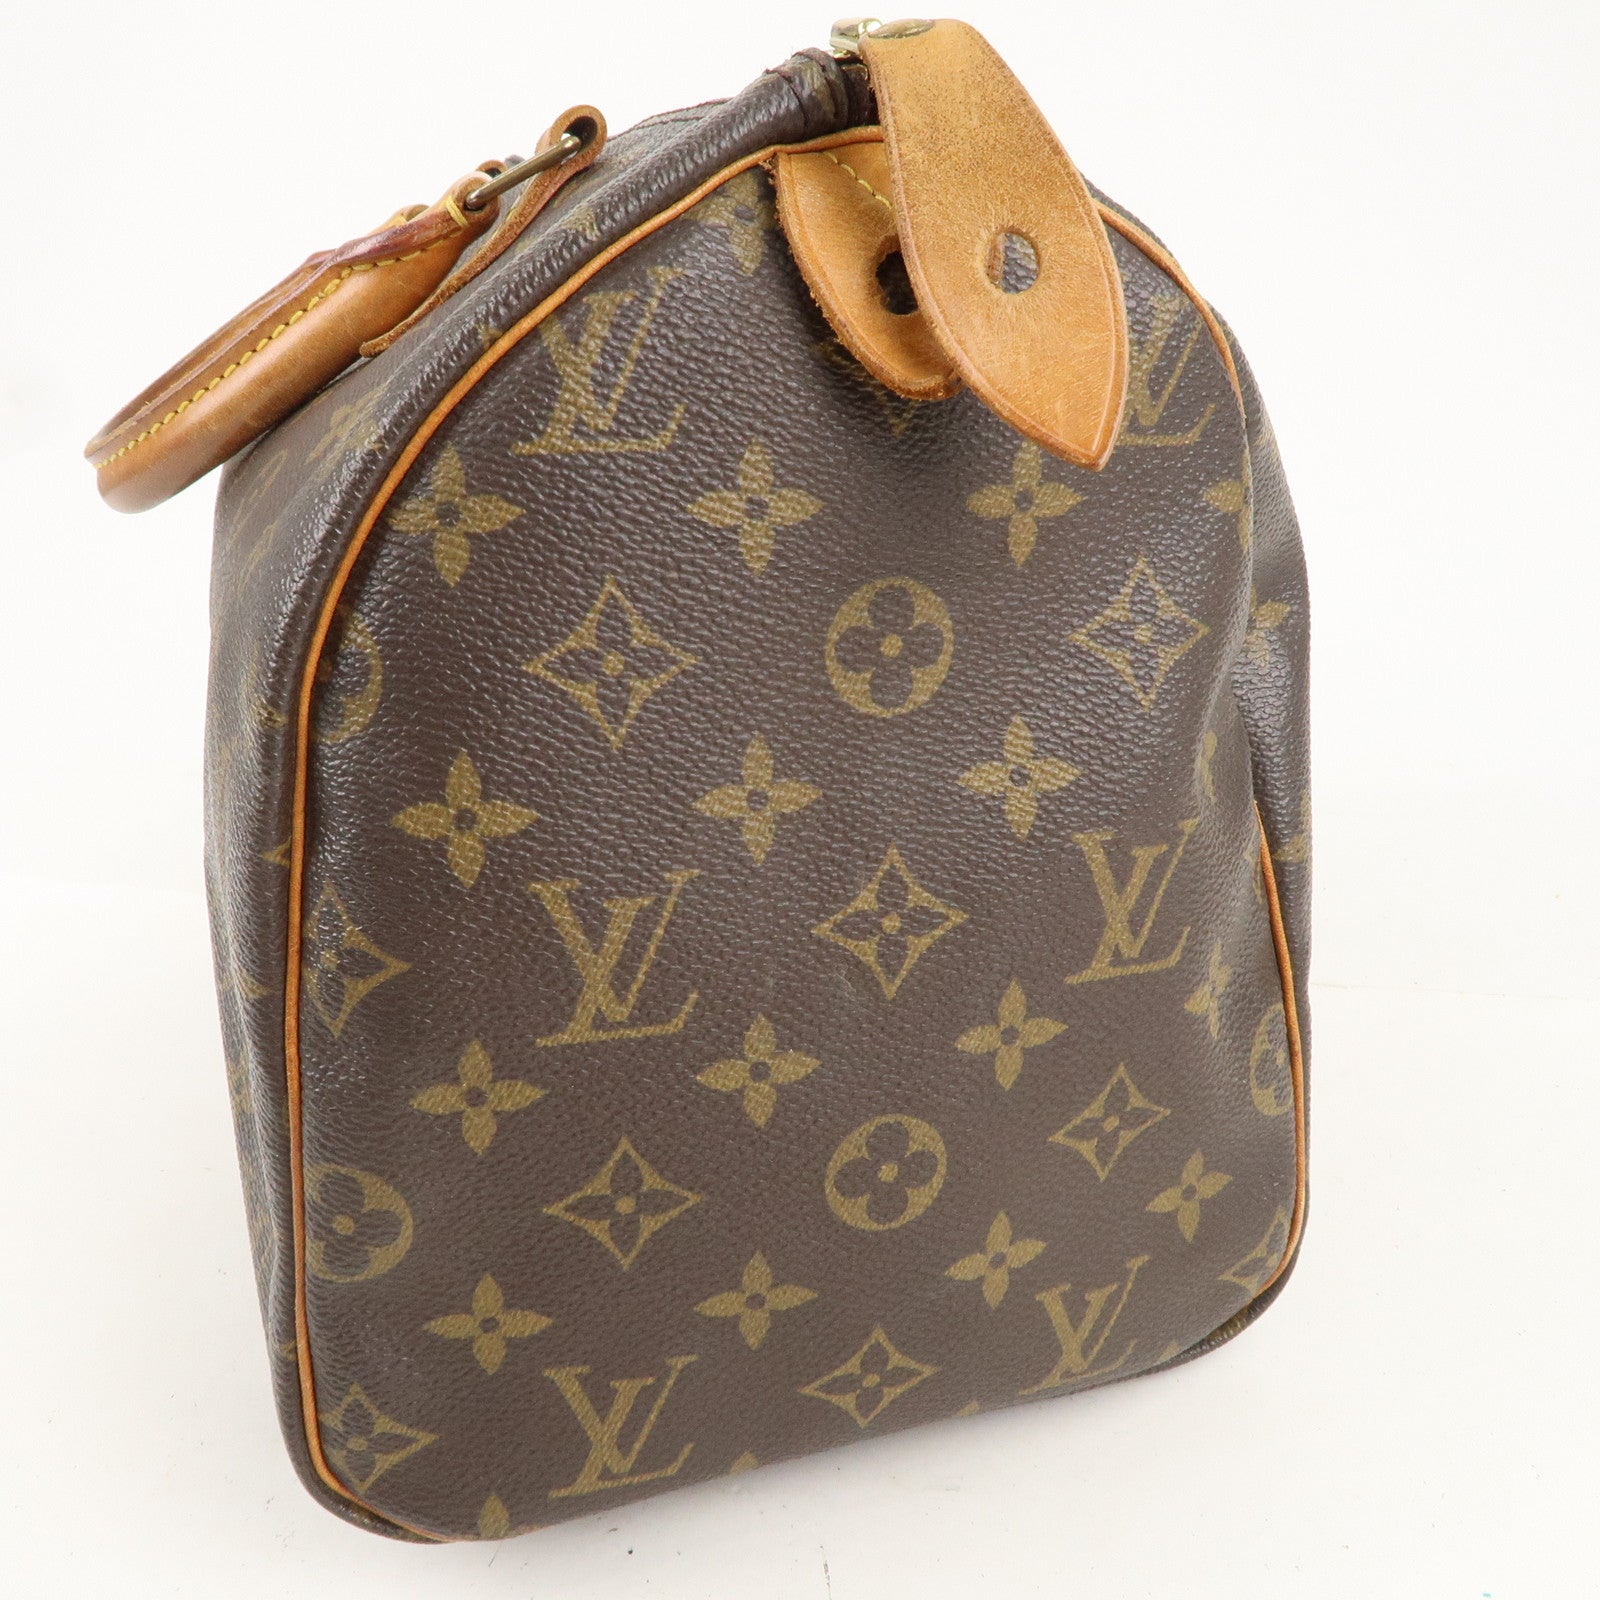 Buy Authentic Pre-owned Louis Vuitton Vintage Lv Monogram Speedy 30 Hand  Bag Duffle M41526 M41108 210077 from Japan - Buy authentic Plus exclusive  items from Japan